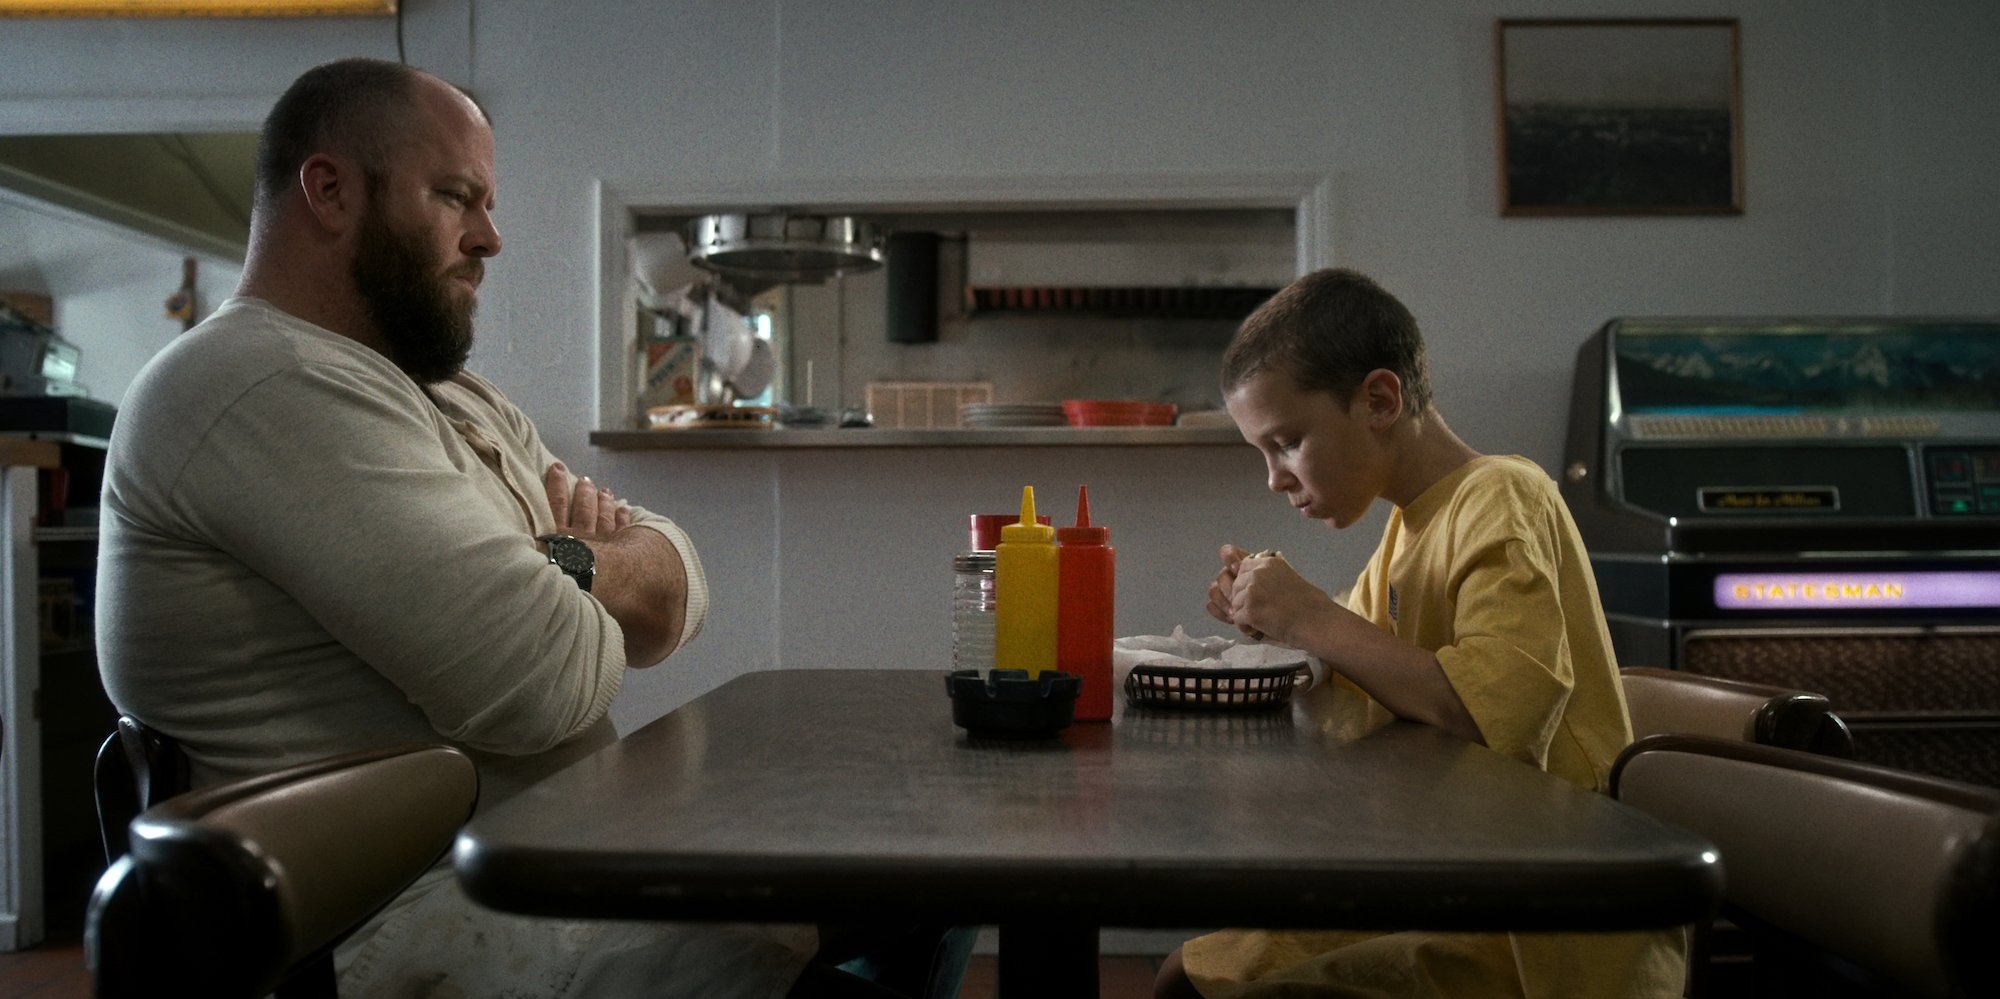 Chris Sullivan as Benny Hammond sitting at a table with Millie Bobby Brown as Eleven in 'Stranger Things' Season 1.